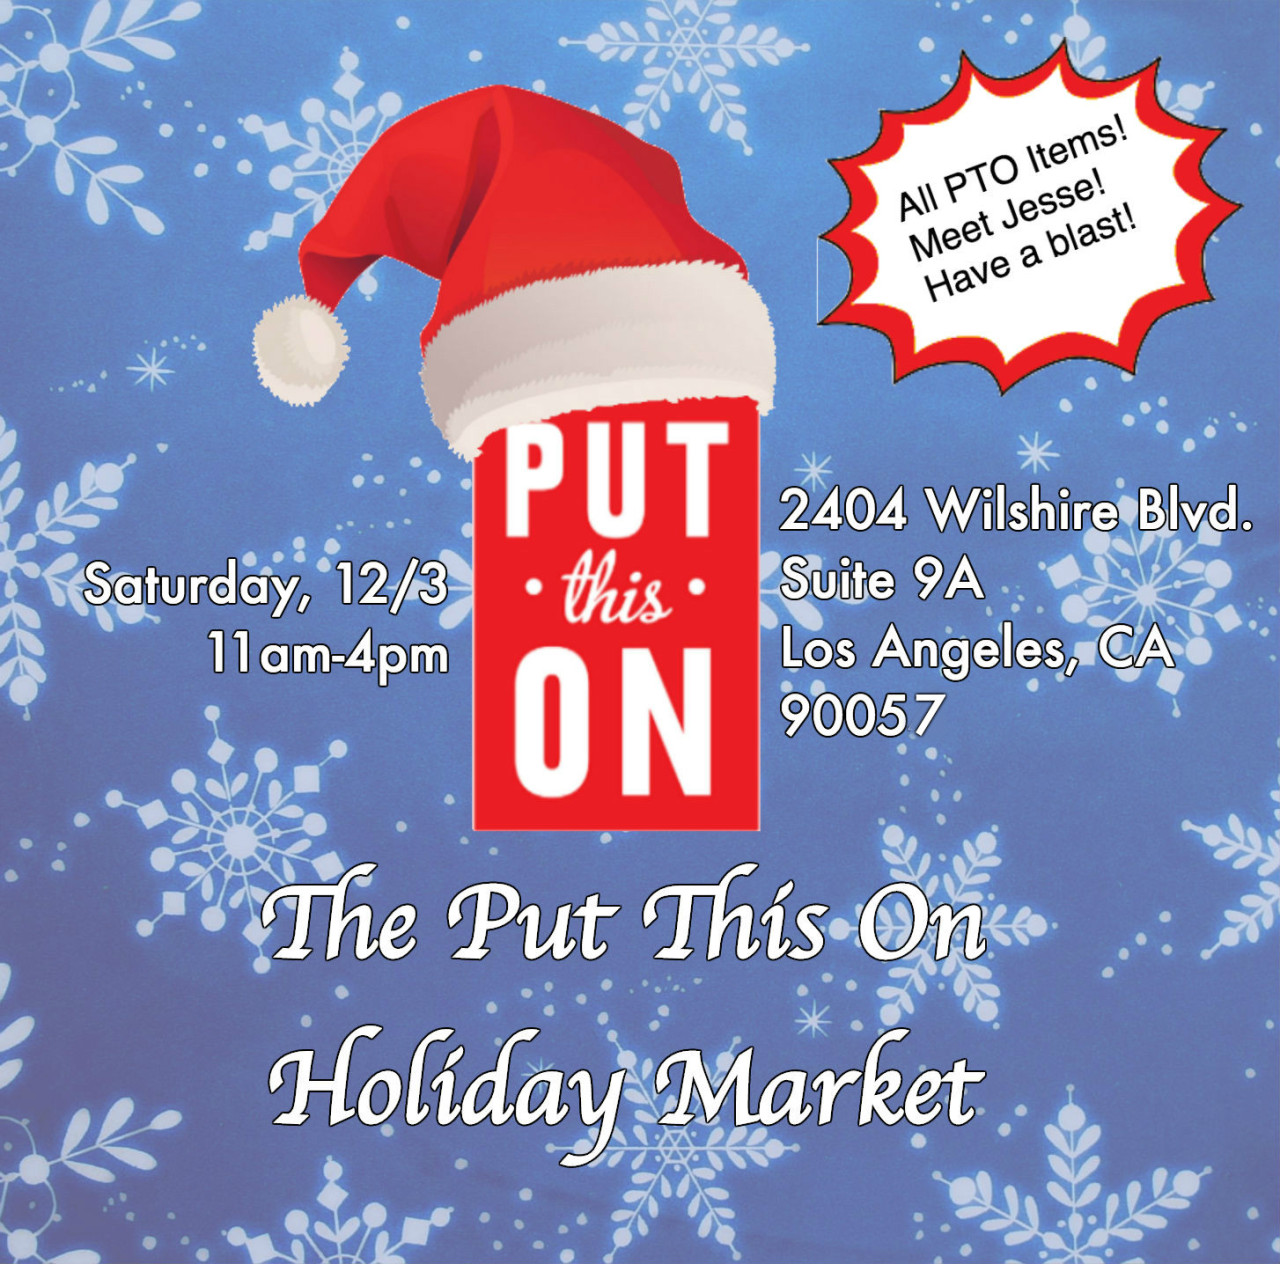 Don’t Forget to Join us Saturday, December 3rd for the Put This On Holiday Market